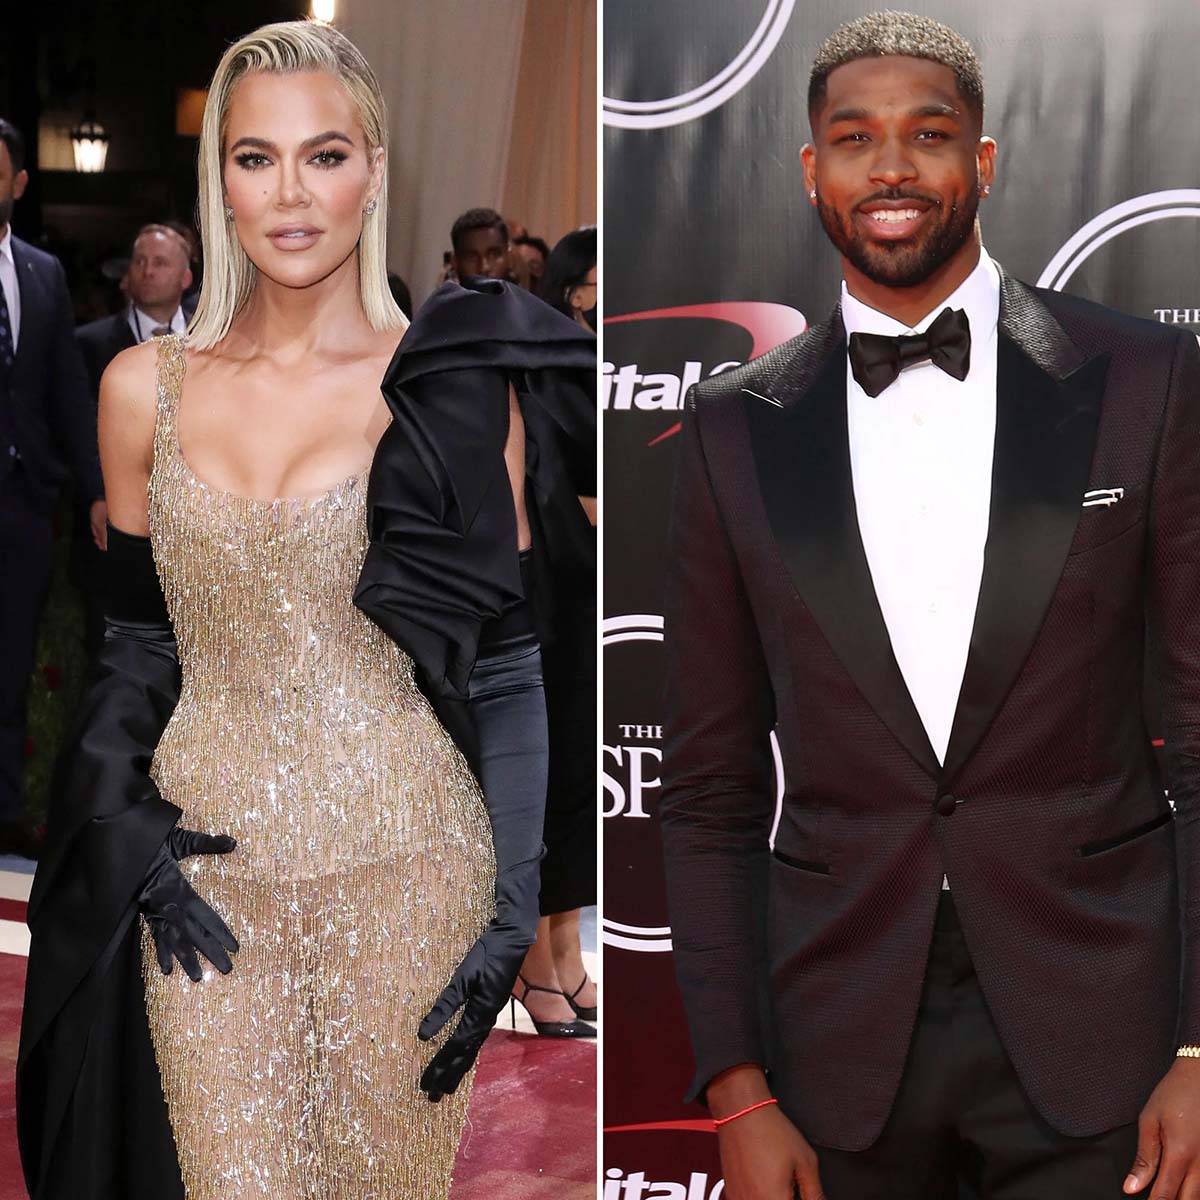 Khloé Kardashian discusses why she shouted “liar” at Tristan Thompson’s appearance at “The Kardashians” premiere